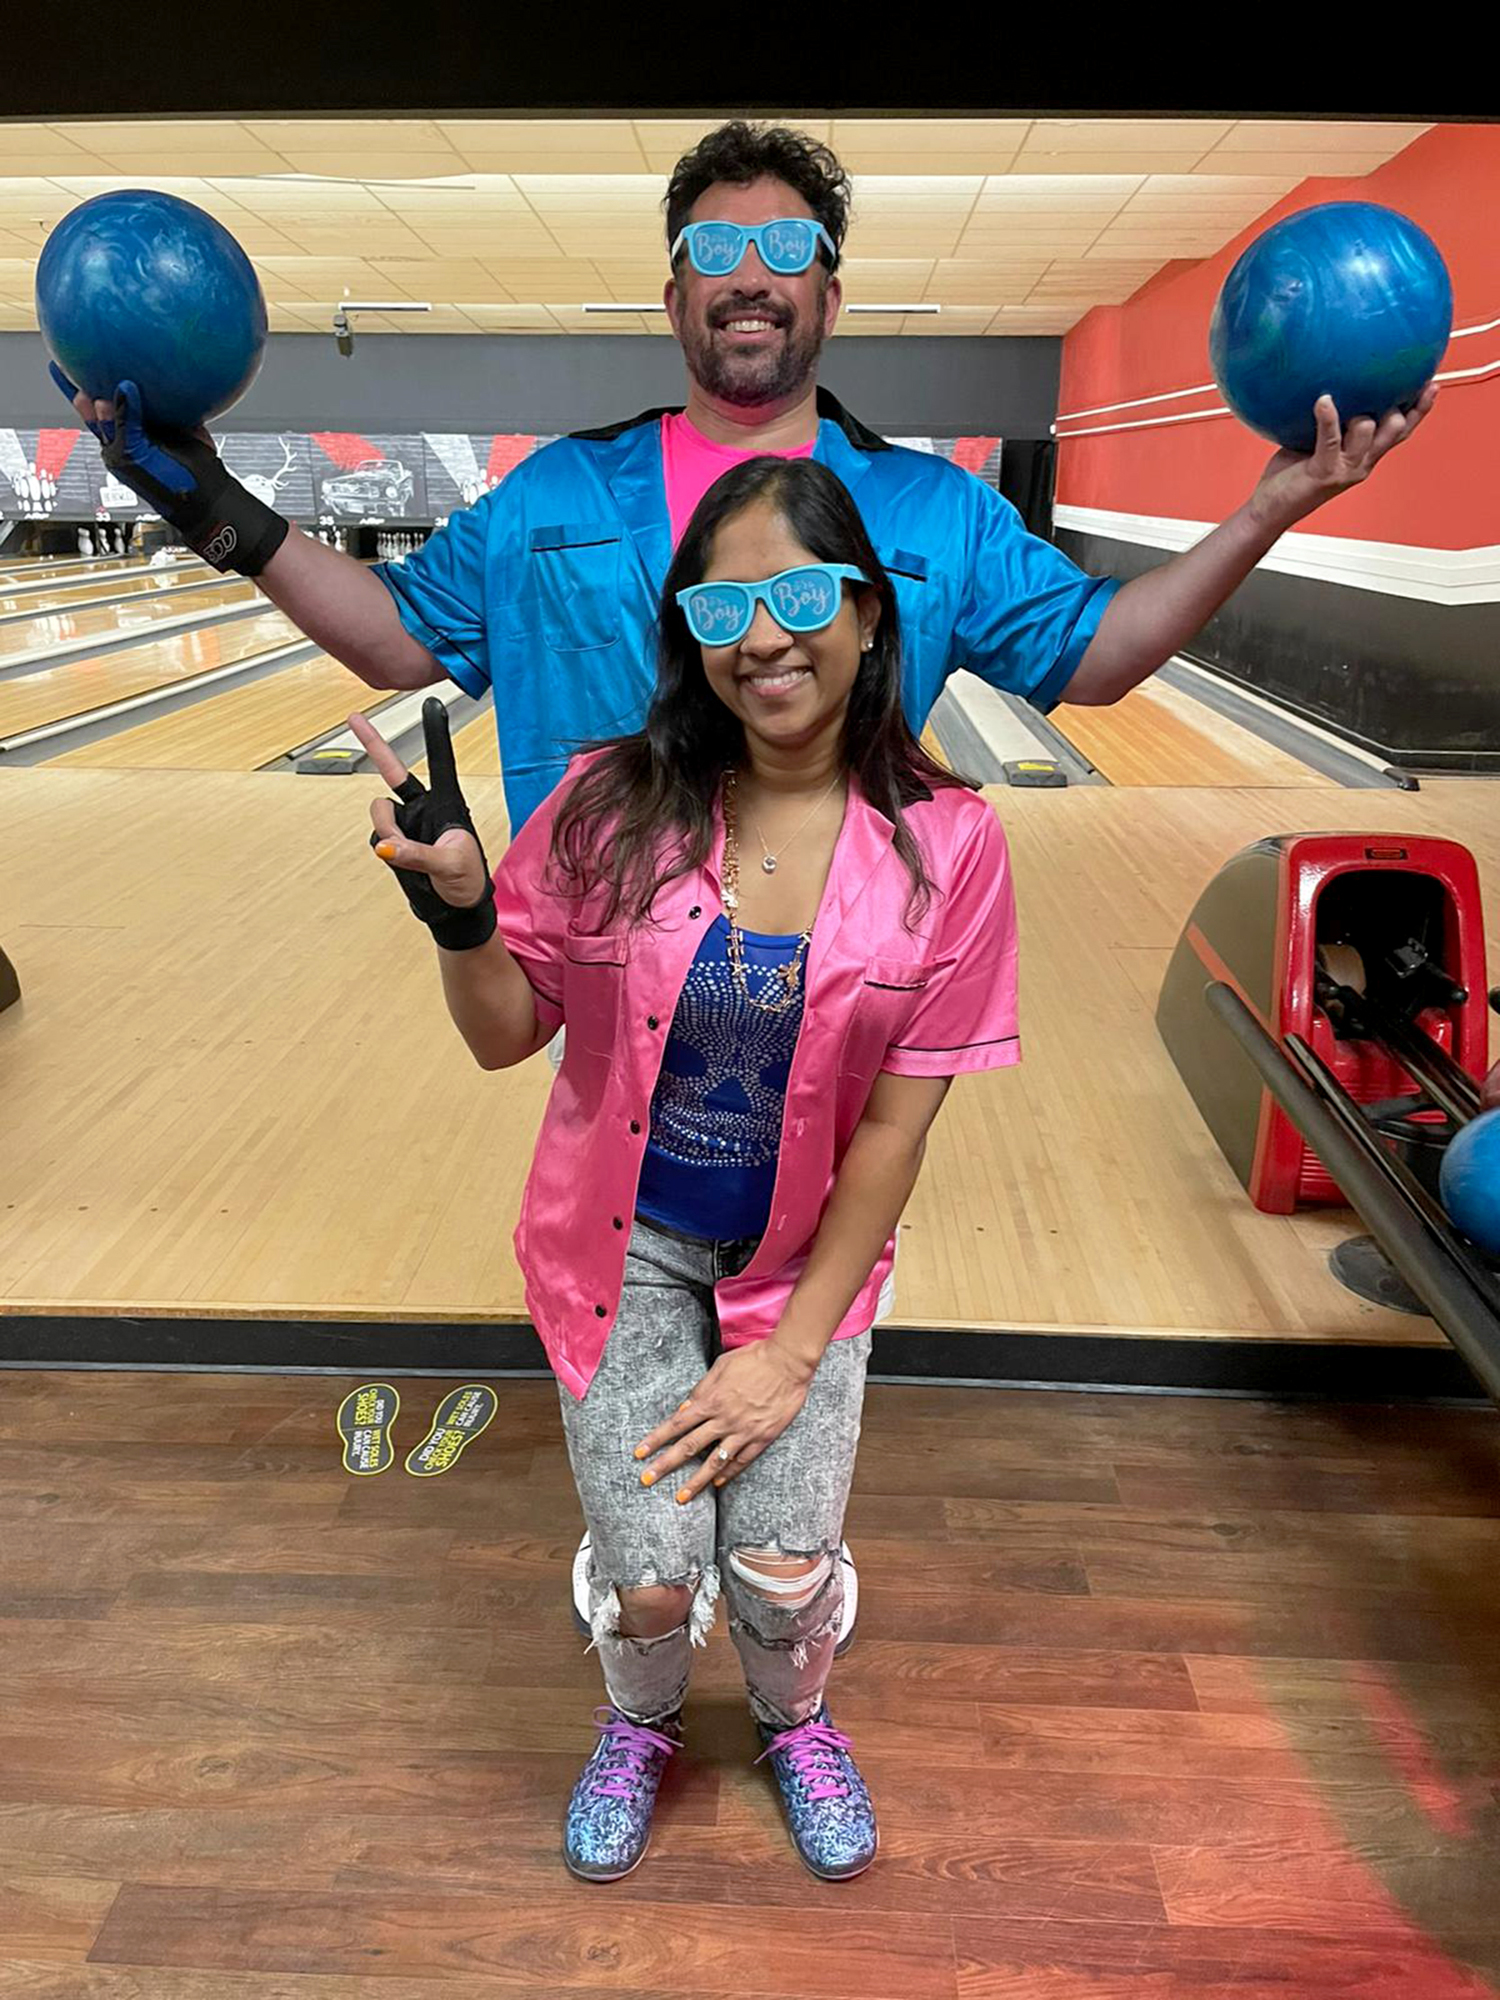 Danny Markulic and Riva Das celebrated their gender reveal party at Bowlero out of their love of bowling. Markulic said the couple would go to a Lakewood Ranch bowling alley 